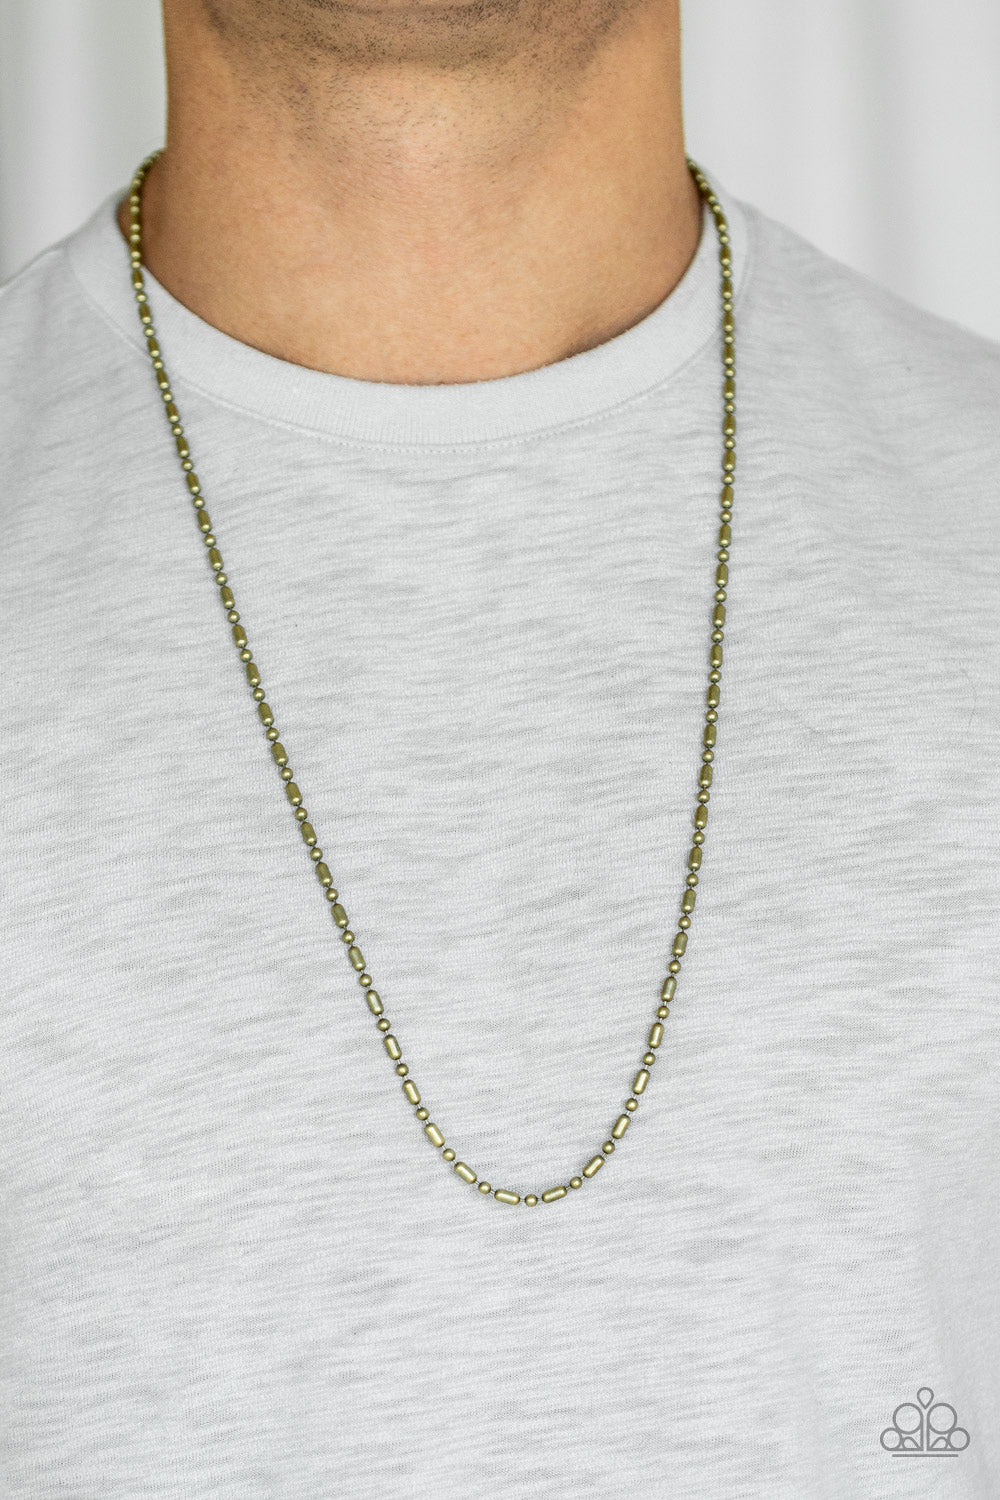 New Paparazzi Accessories - a dainty brass ball and bar chain drapes across the chest for a casual look.